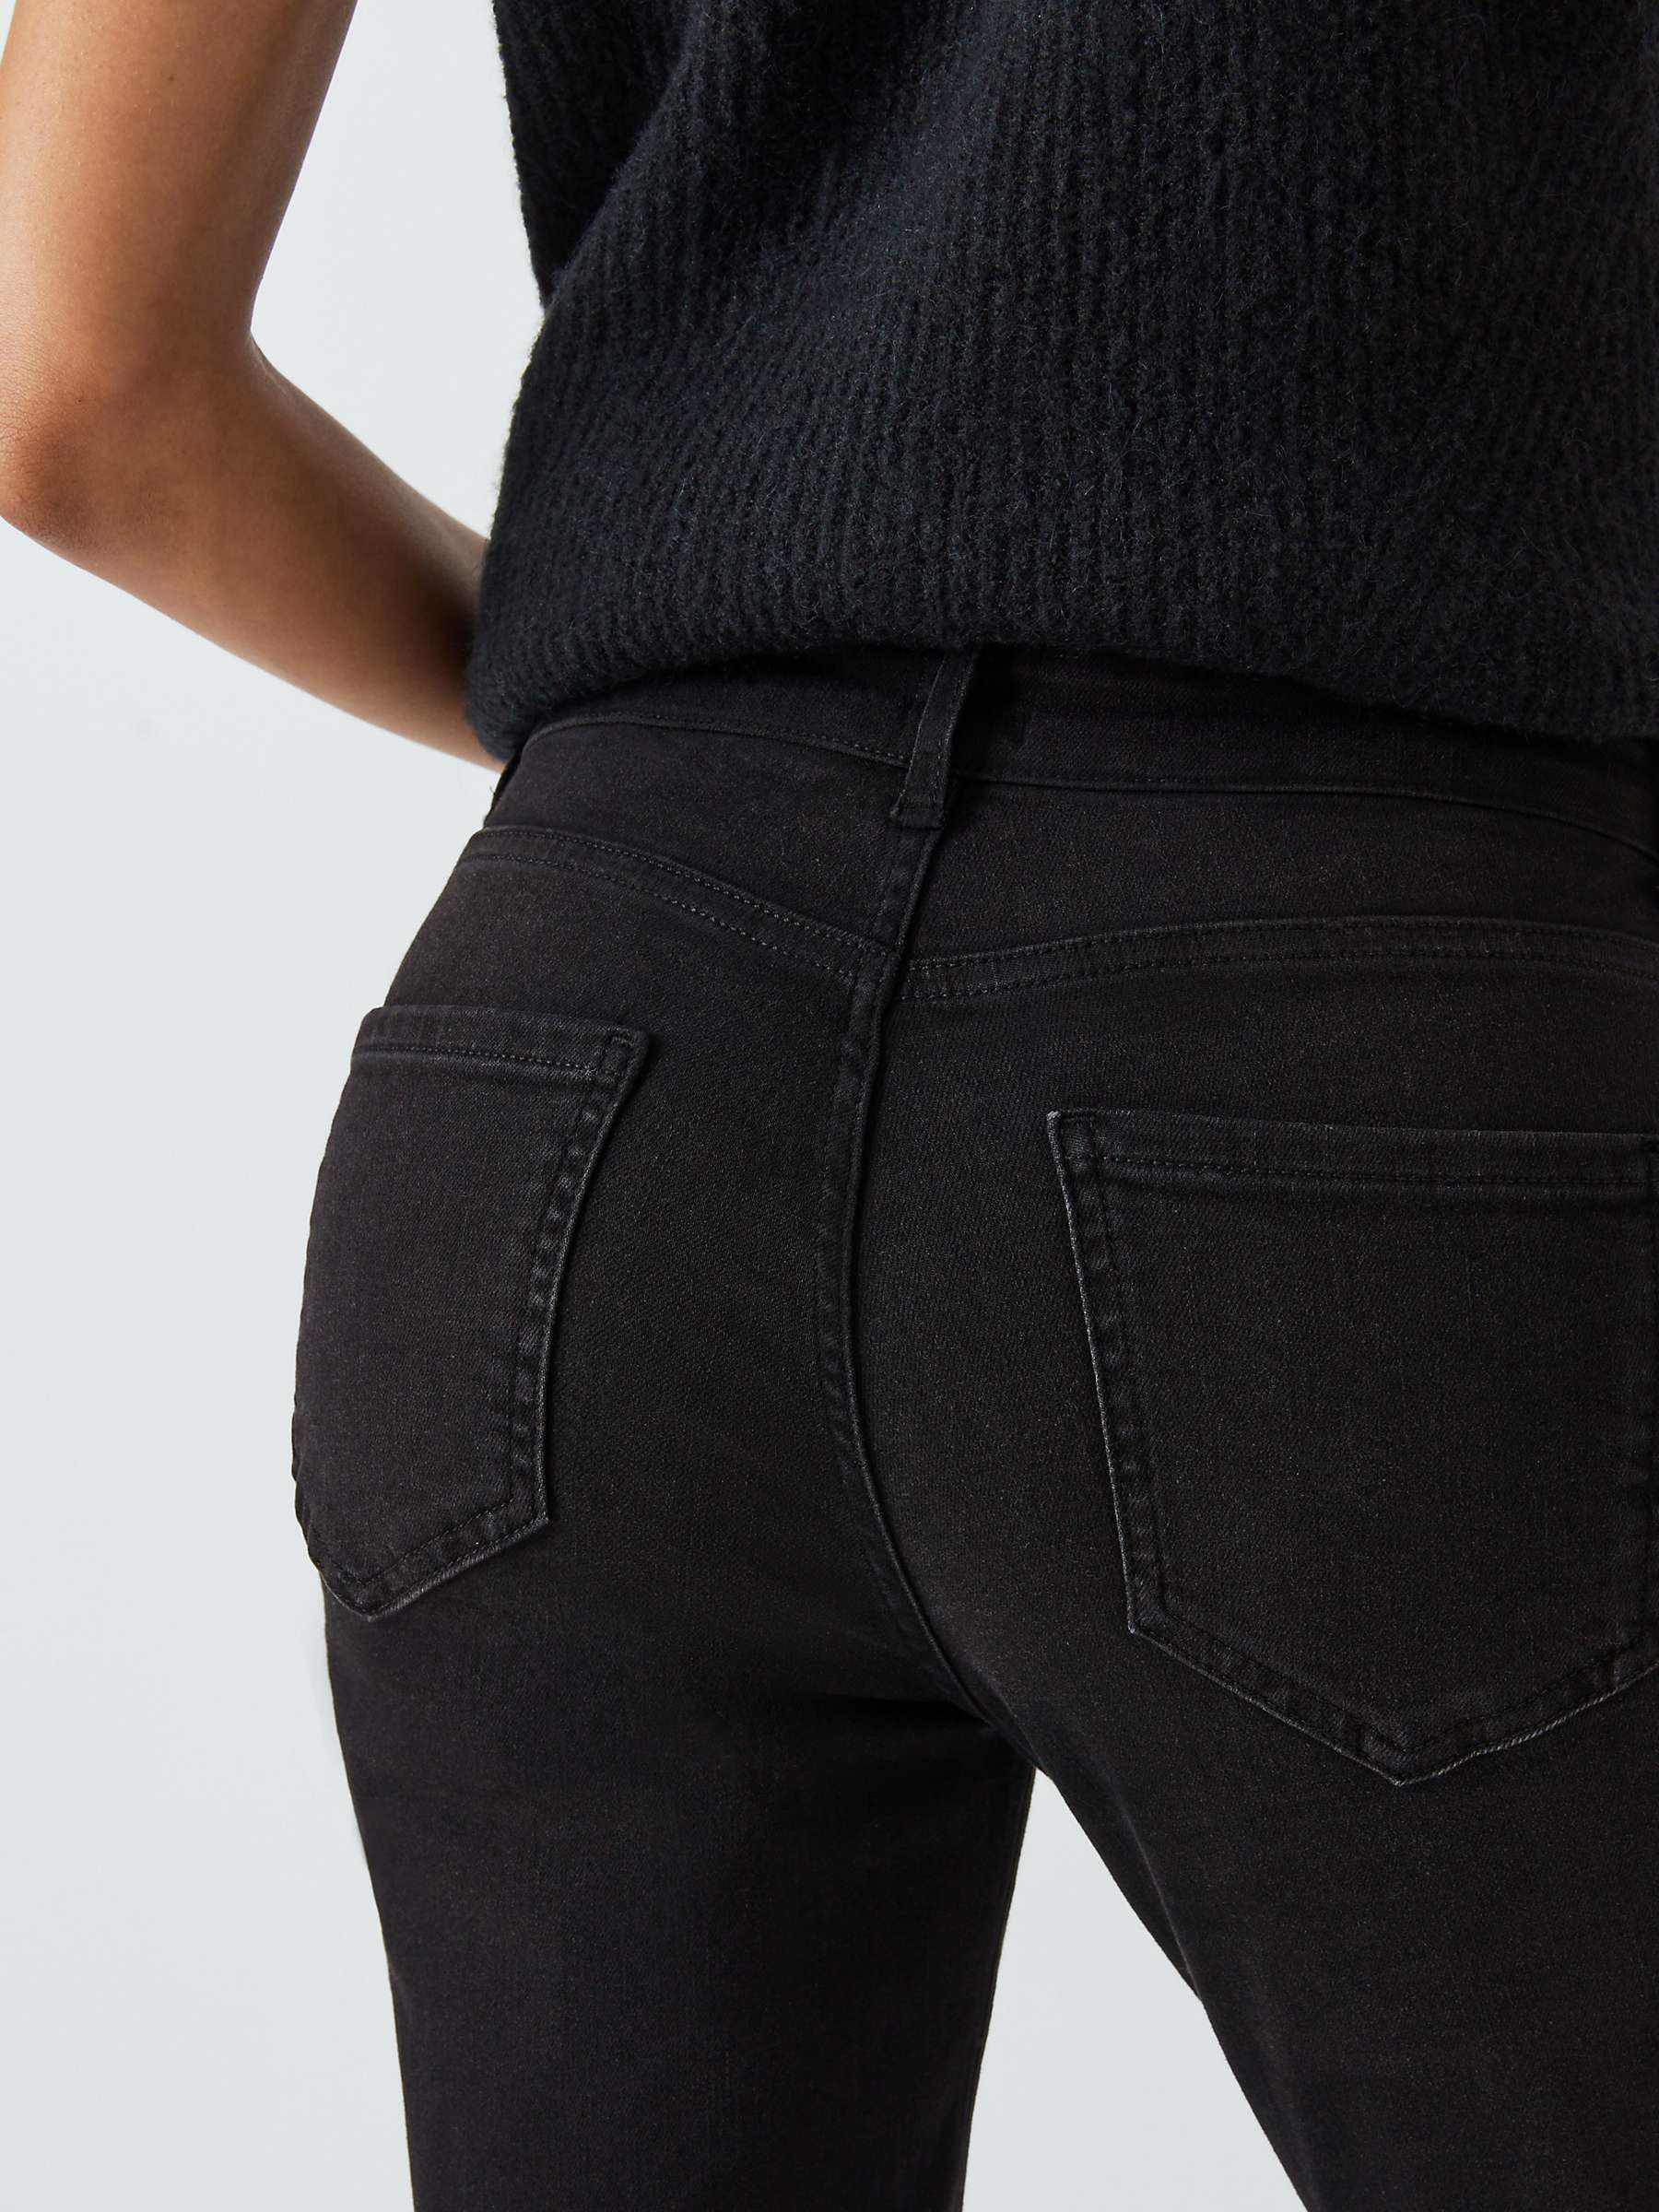 AND/OR Silverlake Straight Cut Jeans, Washed Black at John Lewis & Partners